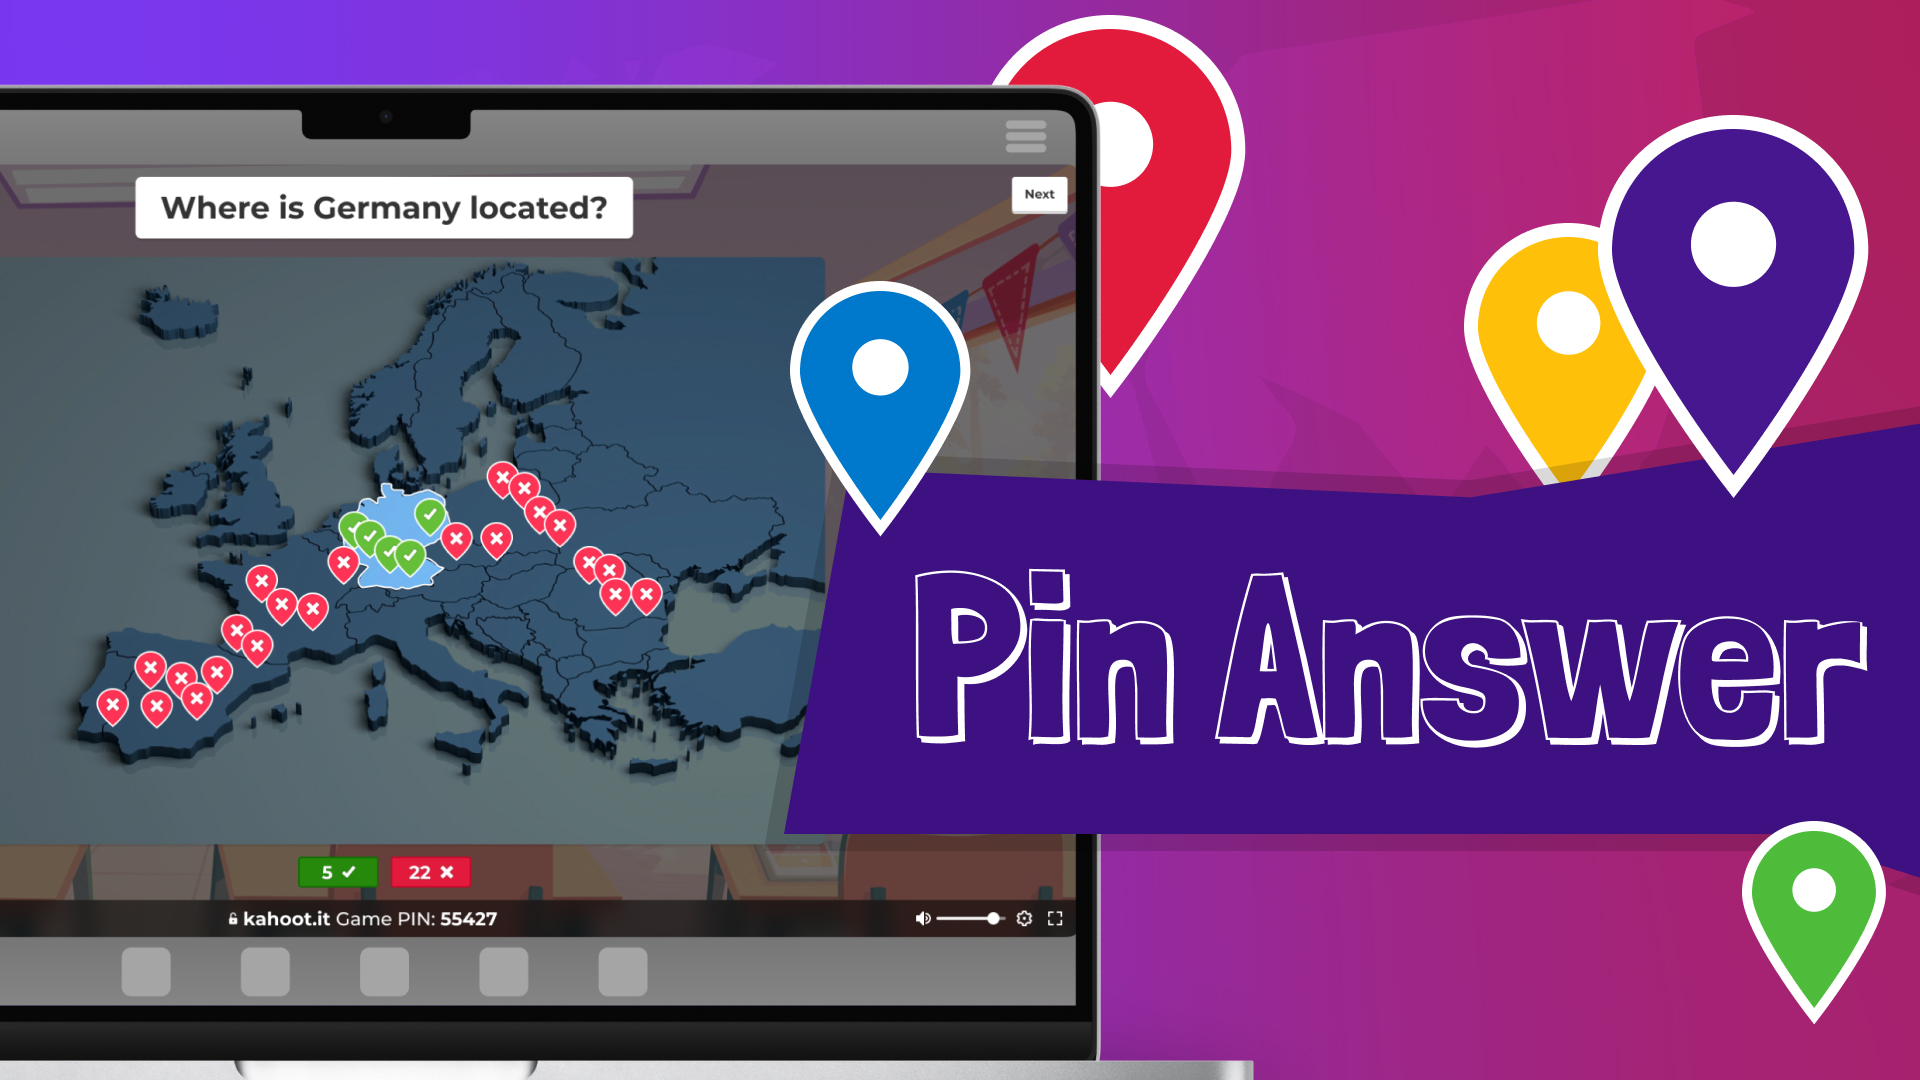 Graphic with Pin Answer title and game screen of the Pin Answer question